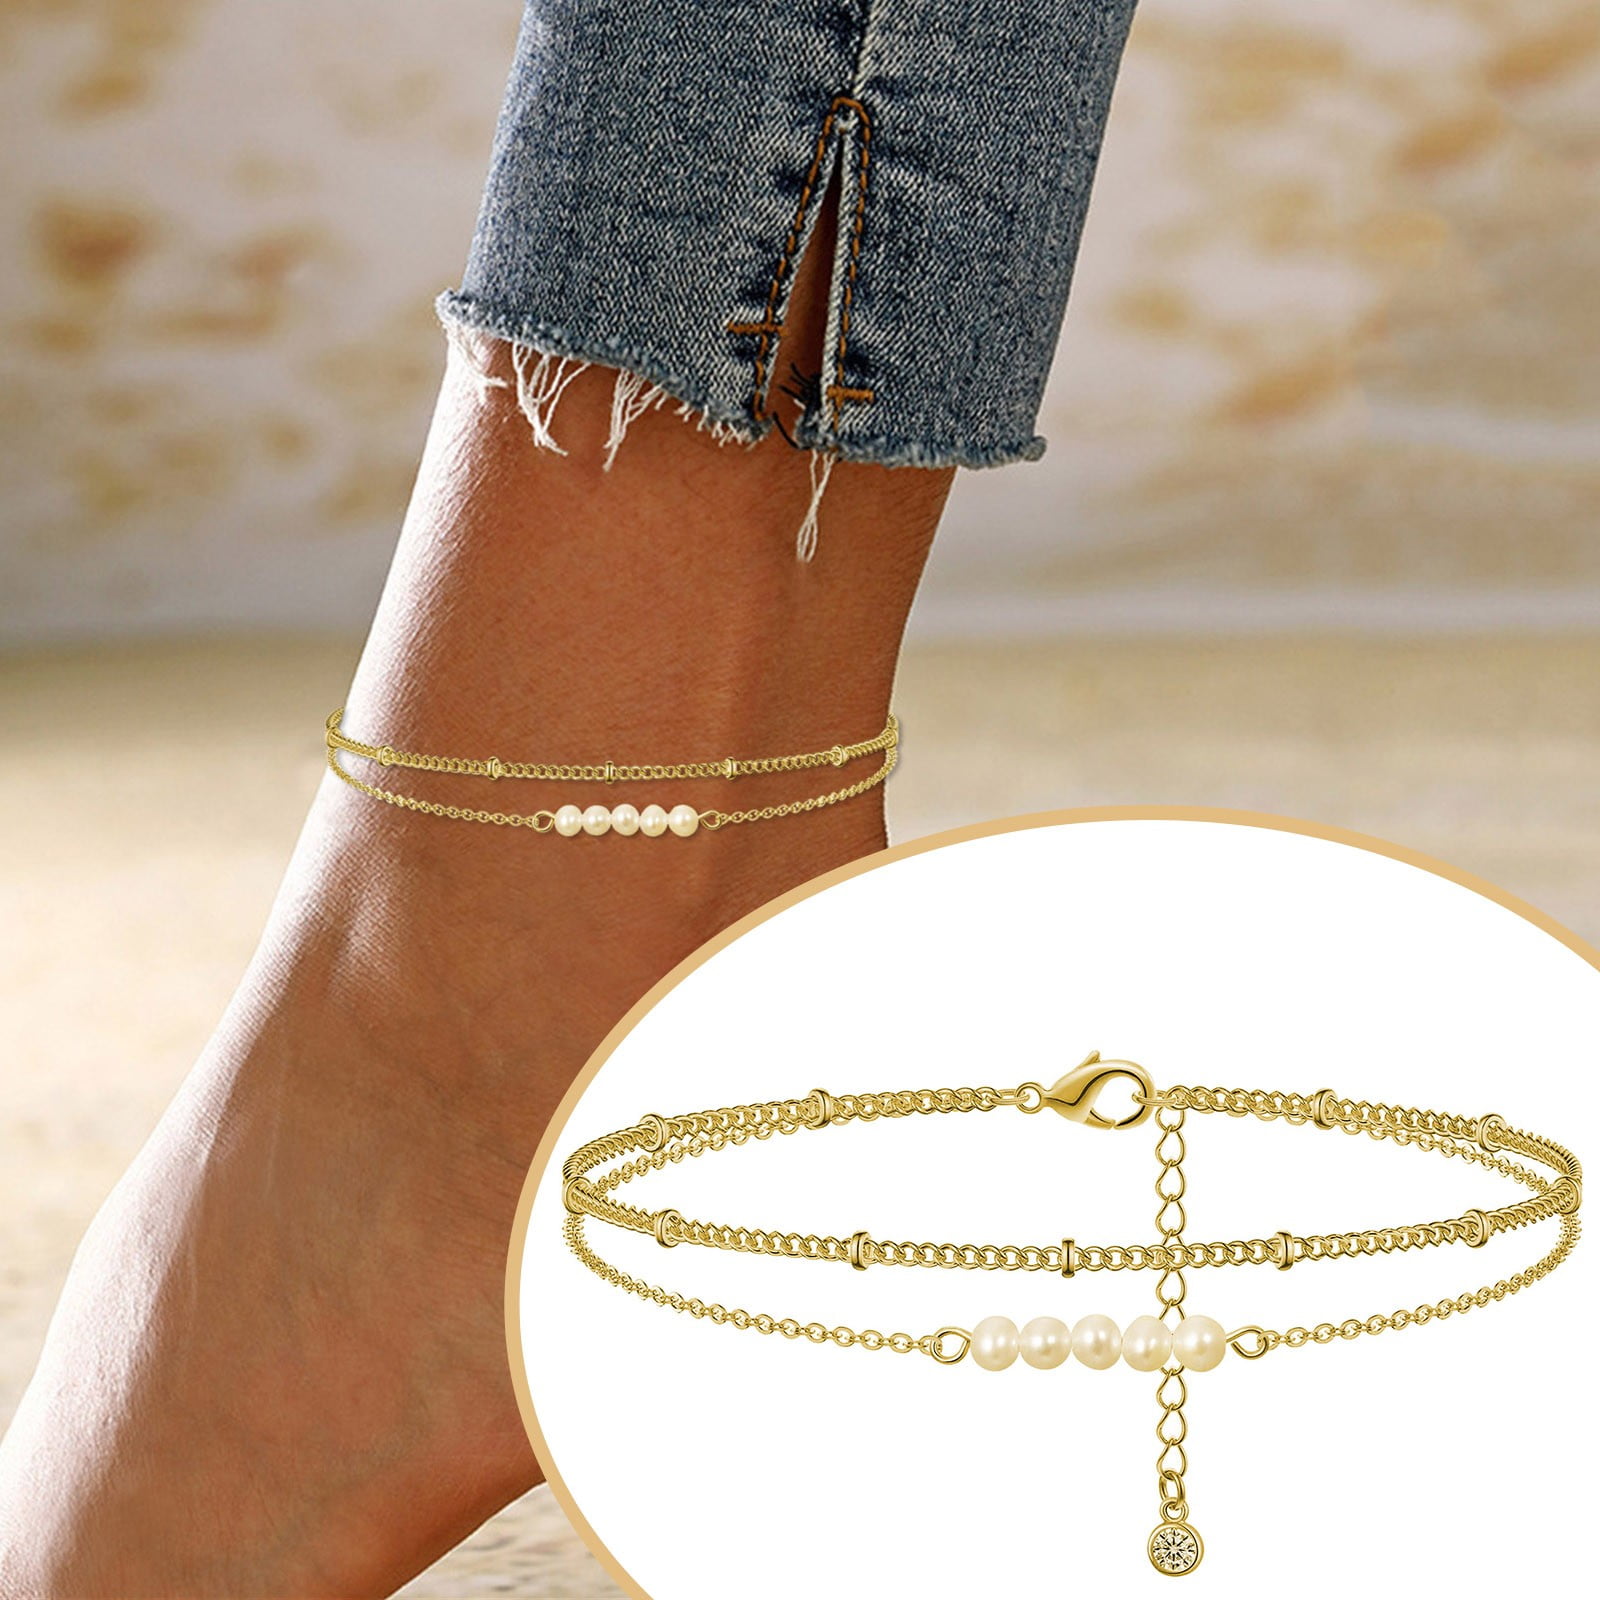 keusn boho double layer gold pearl h anklets chains bracelet women bracelet beads beach pendant ankle for anklets foot